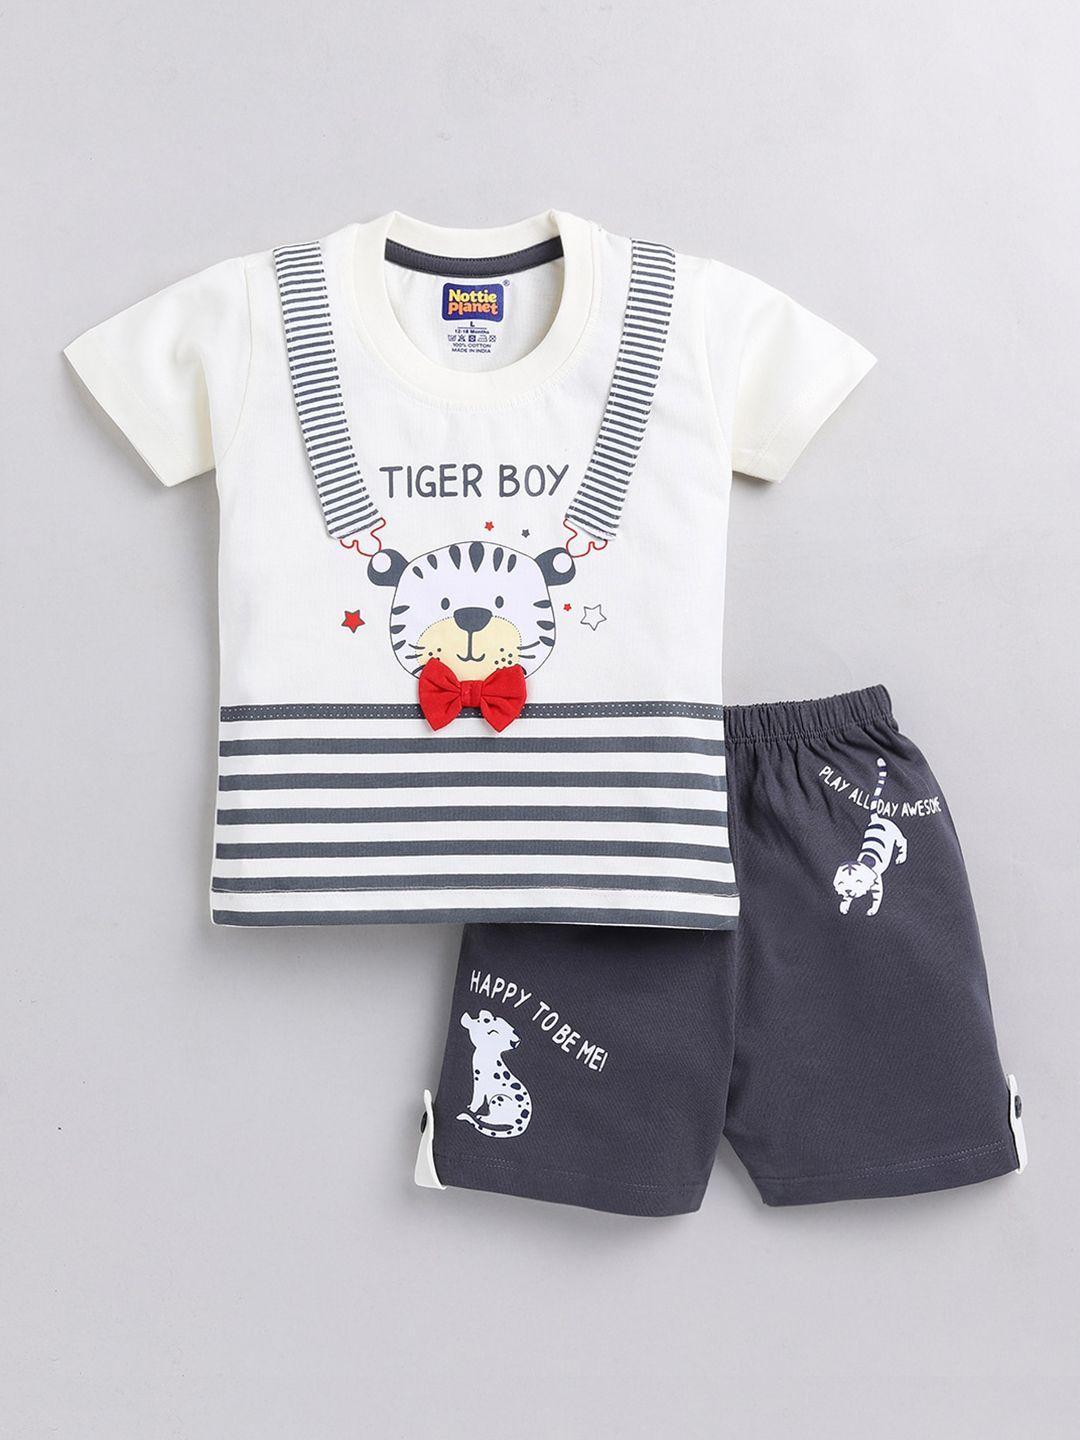 nottie planet boys cotton printed t-shirt with shorts set